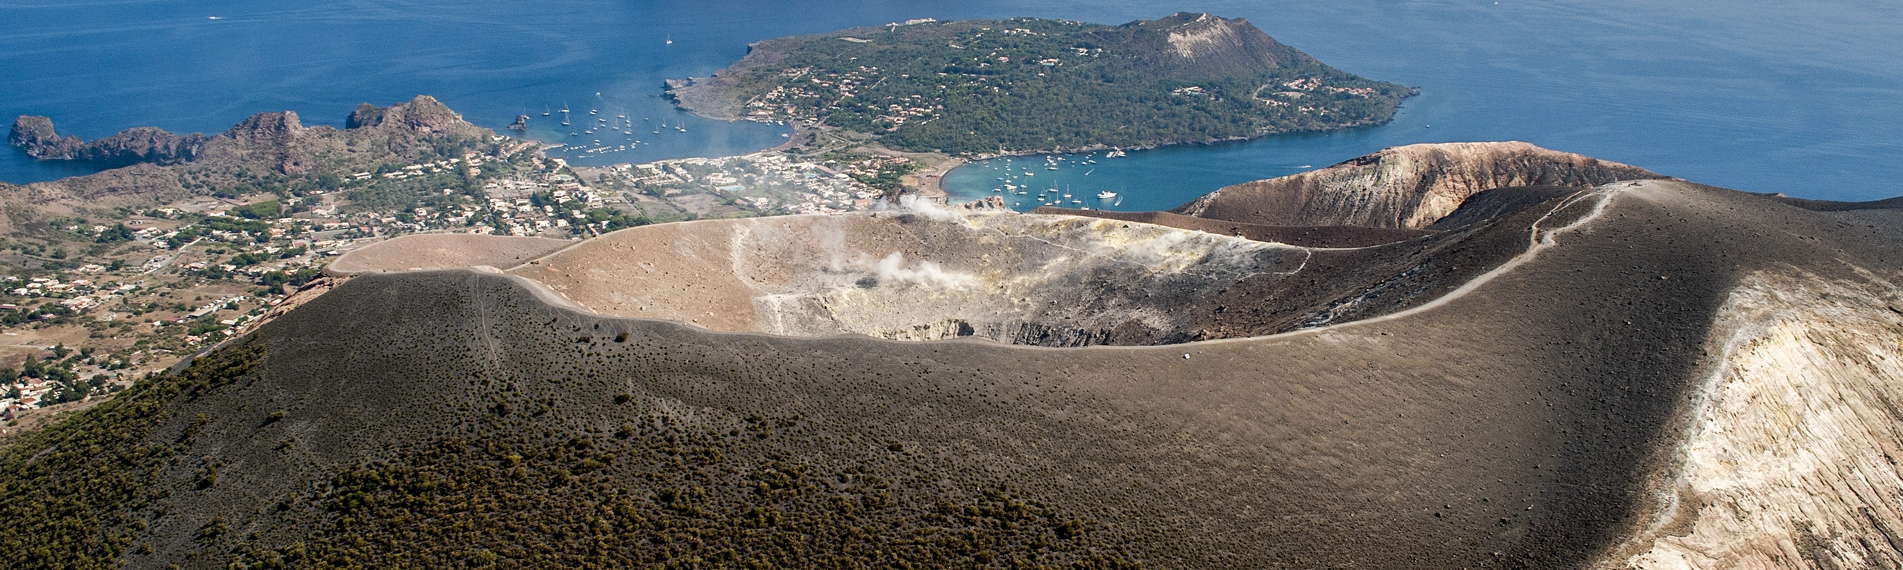 View of the crater and the sea, on ​​Vulcano in the Aeolian Islands, Italy.